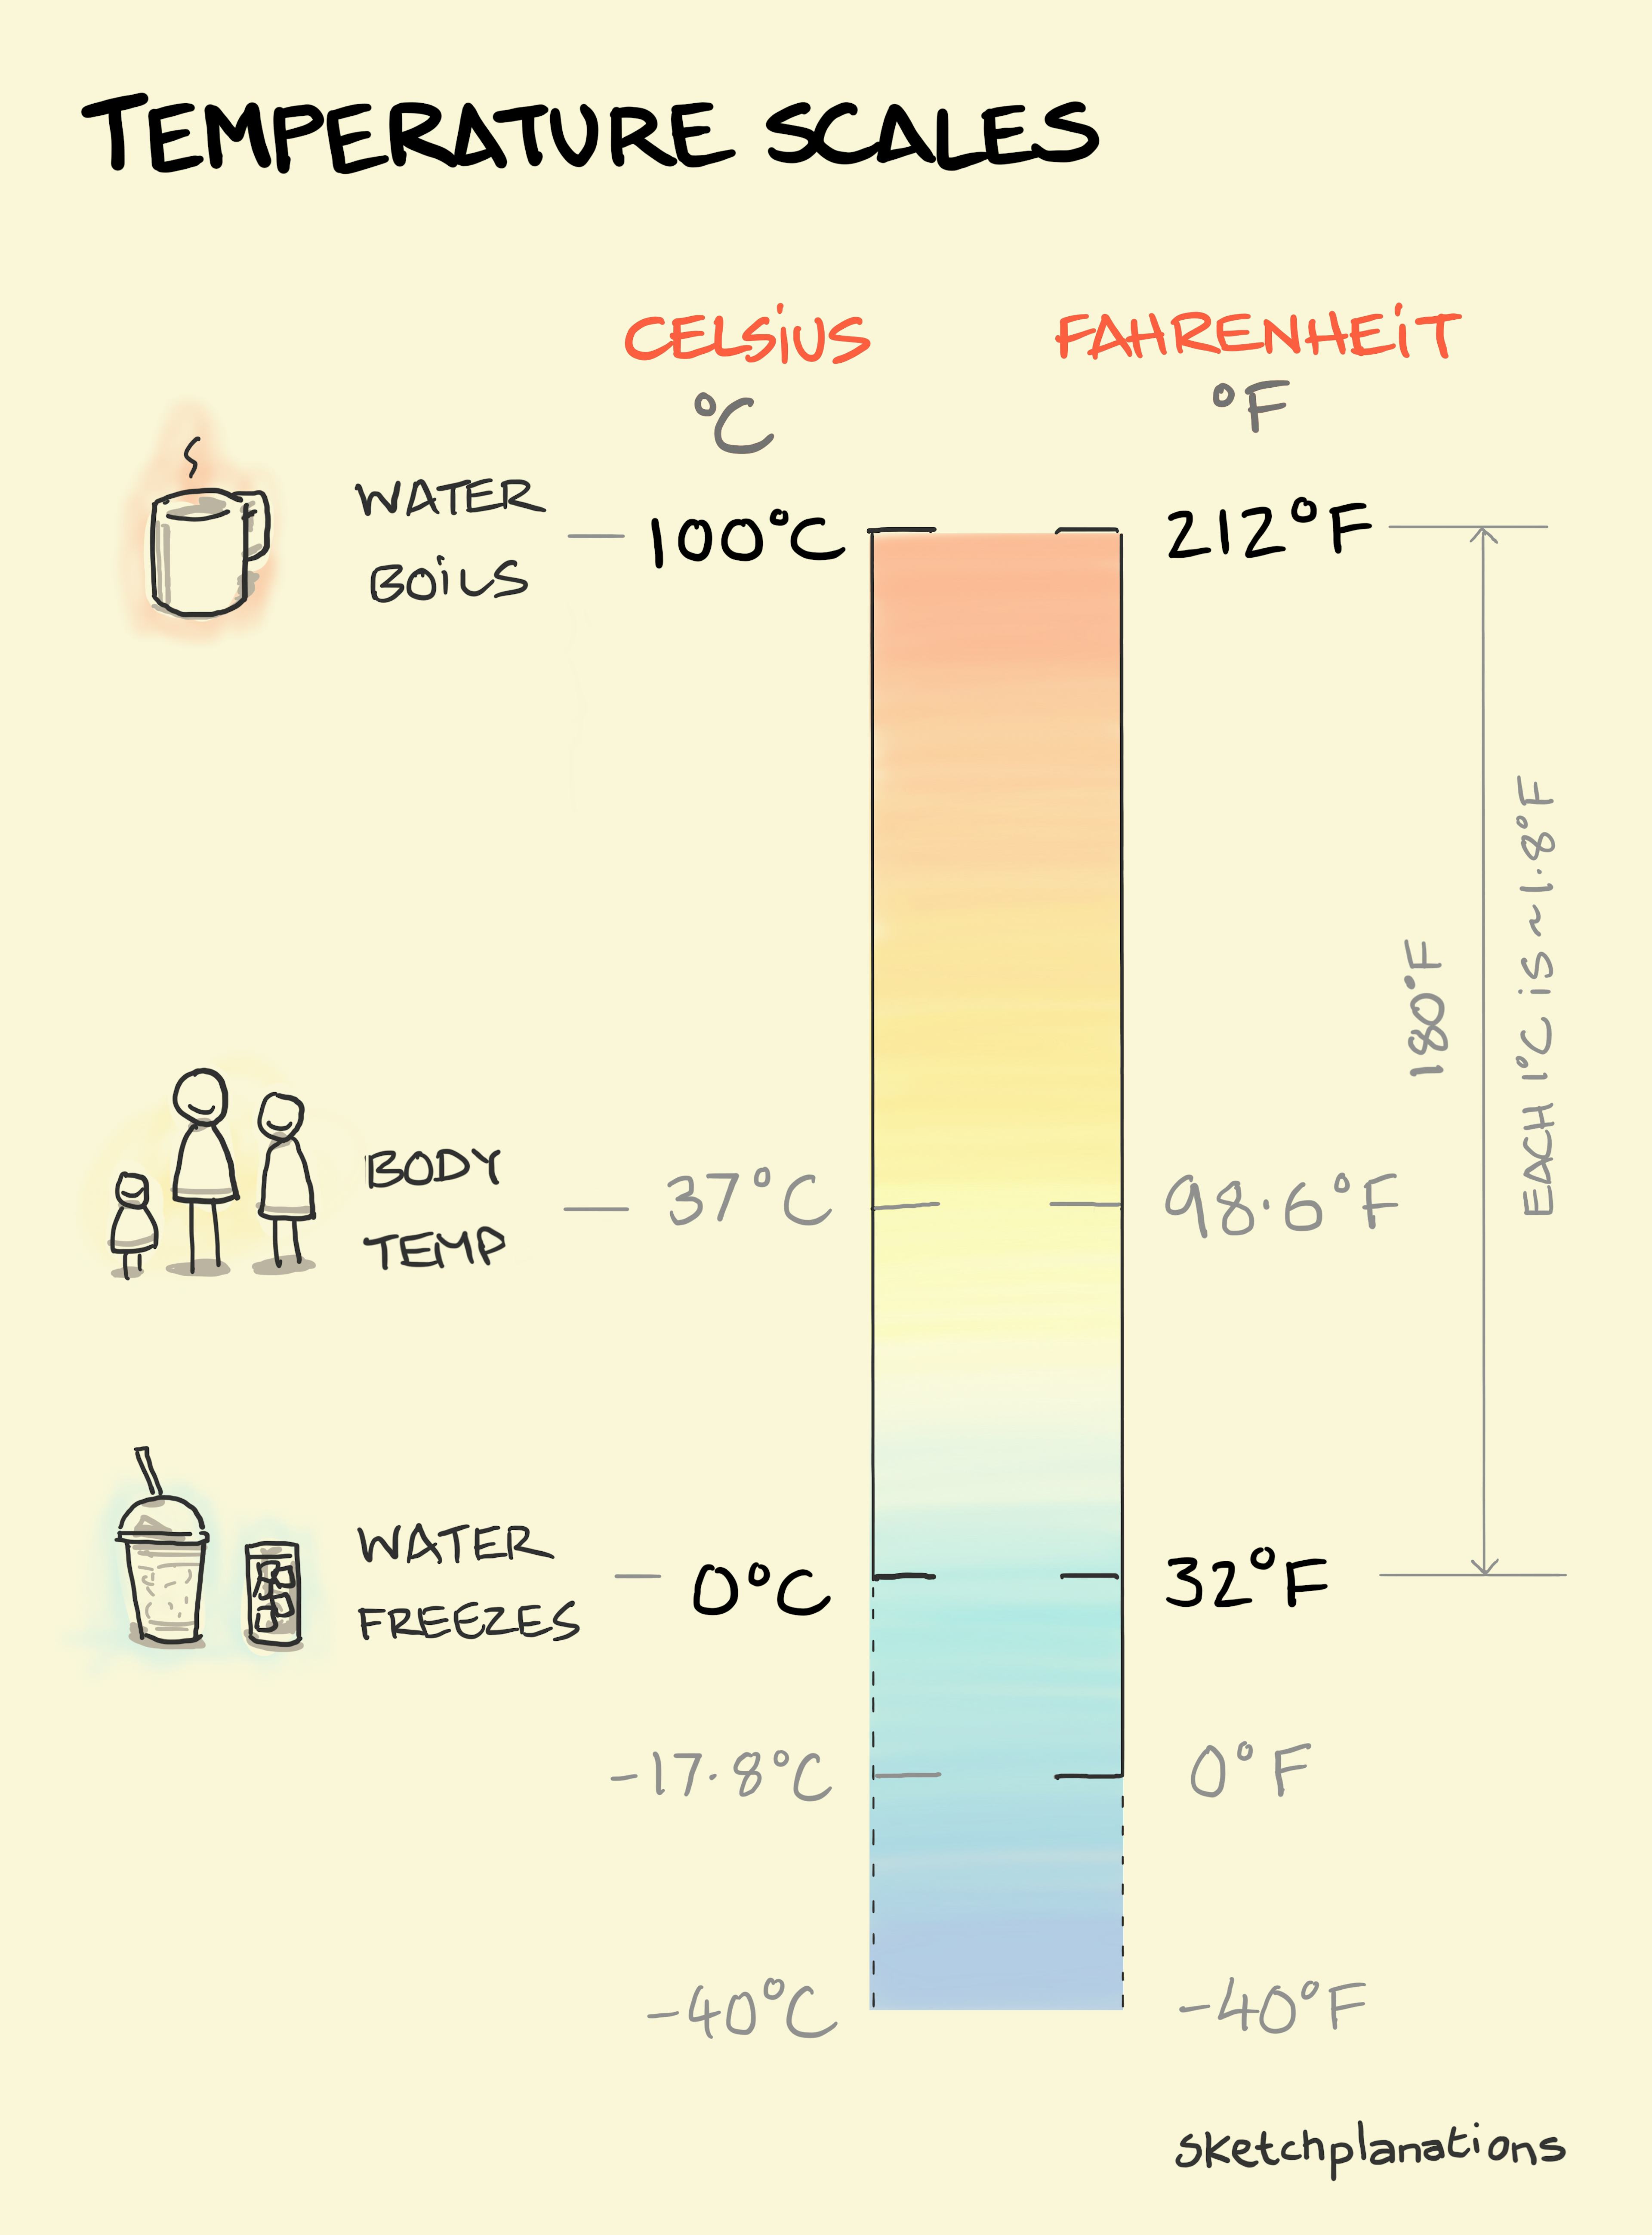 Fahrenheit and Celsius - Sketchplanations